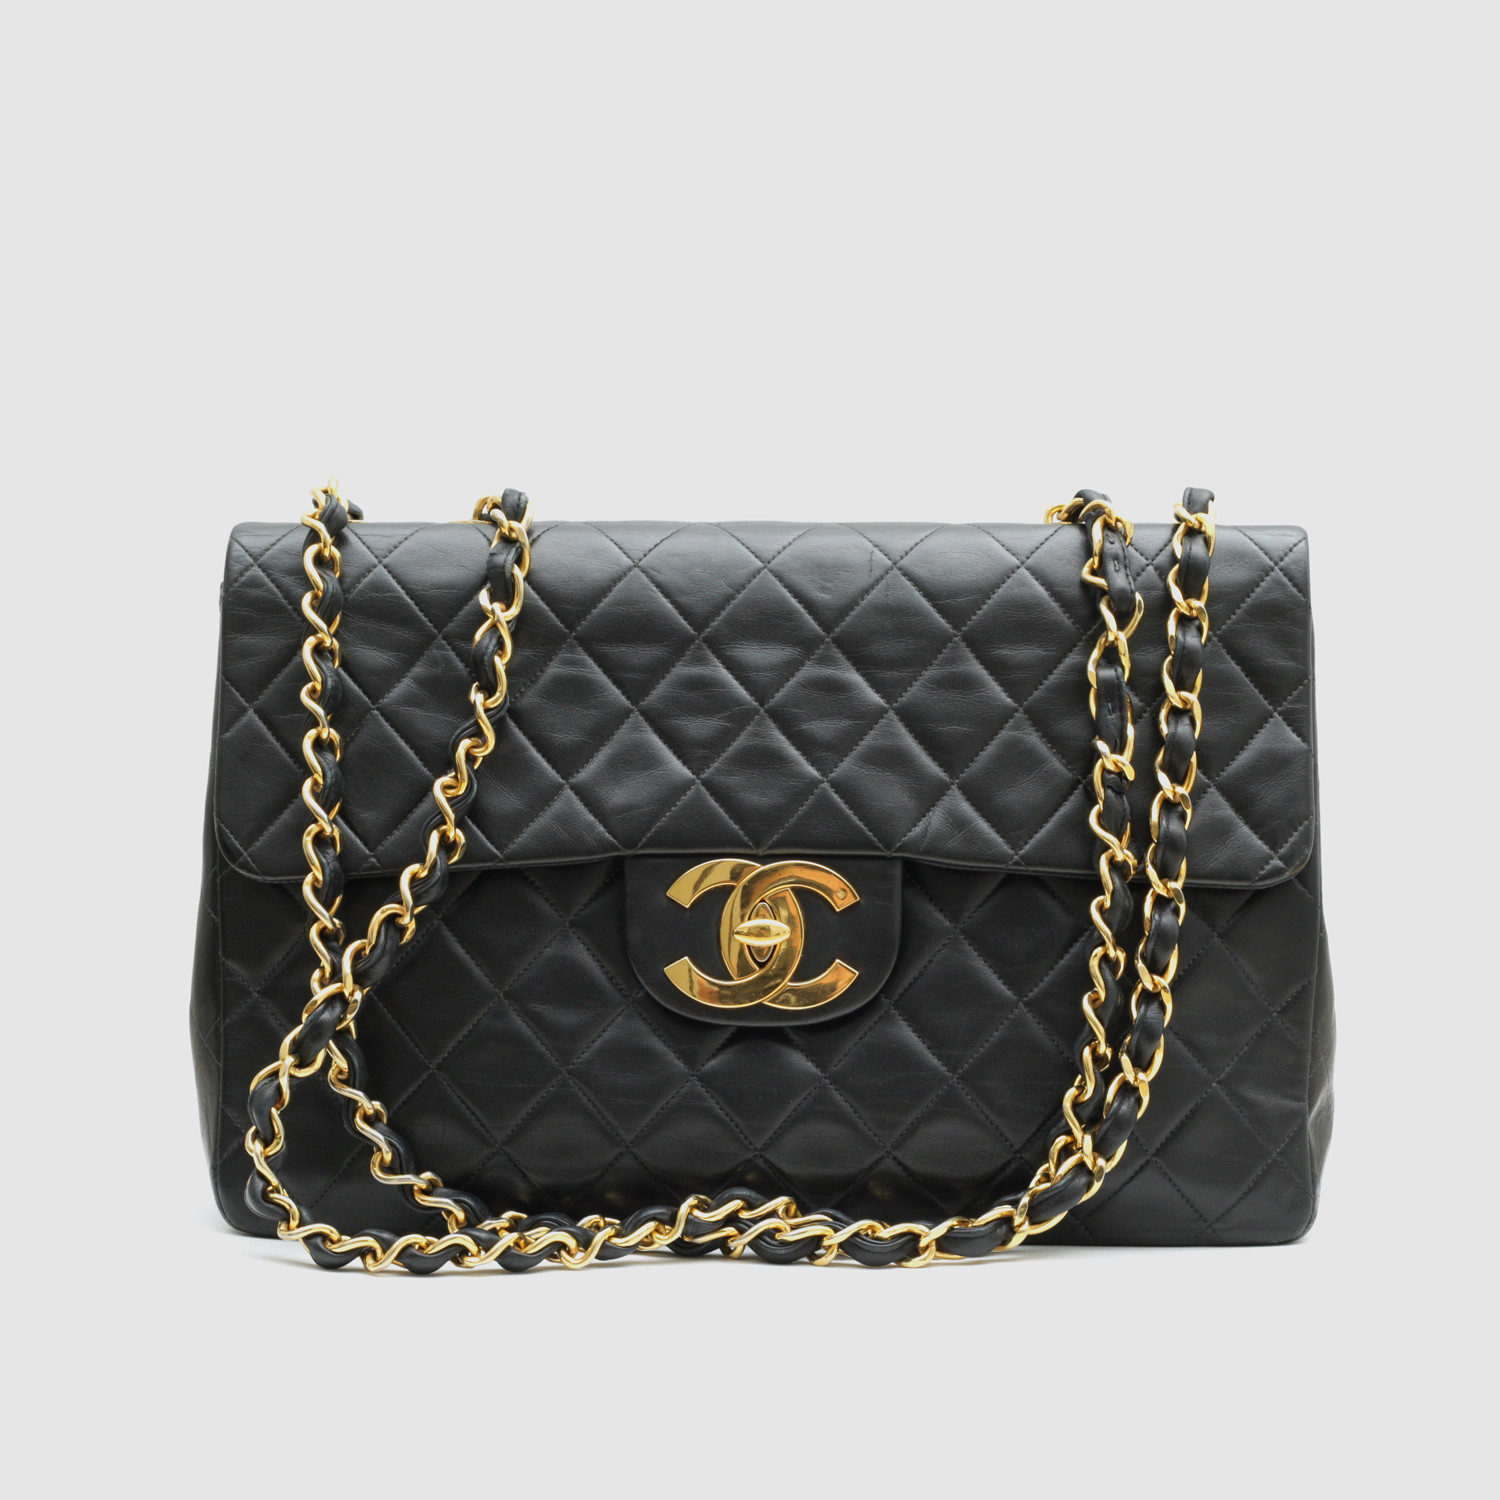 Chanel Classic Large Jumbo Flap Bag // Black Quilted Lambskin - Vintage